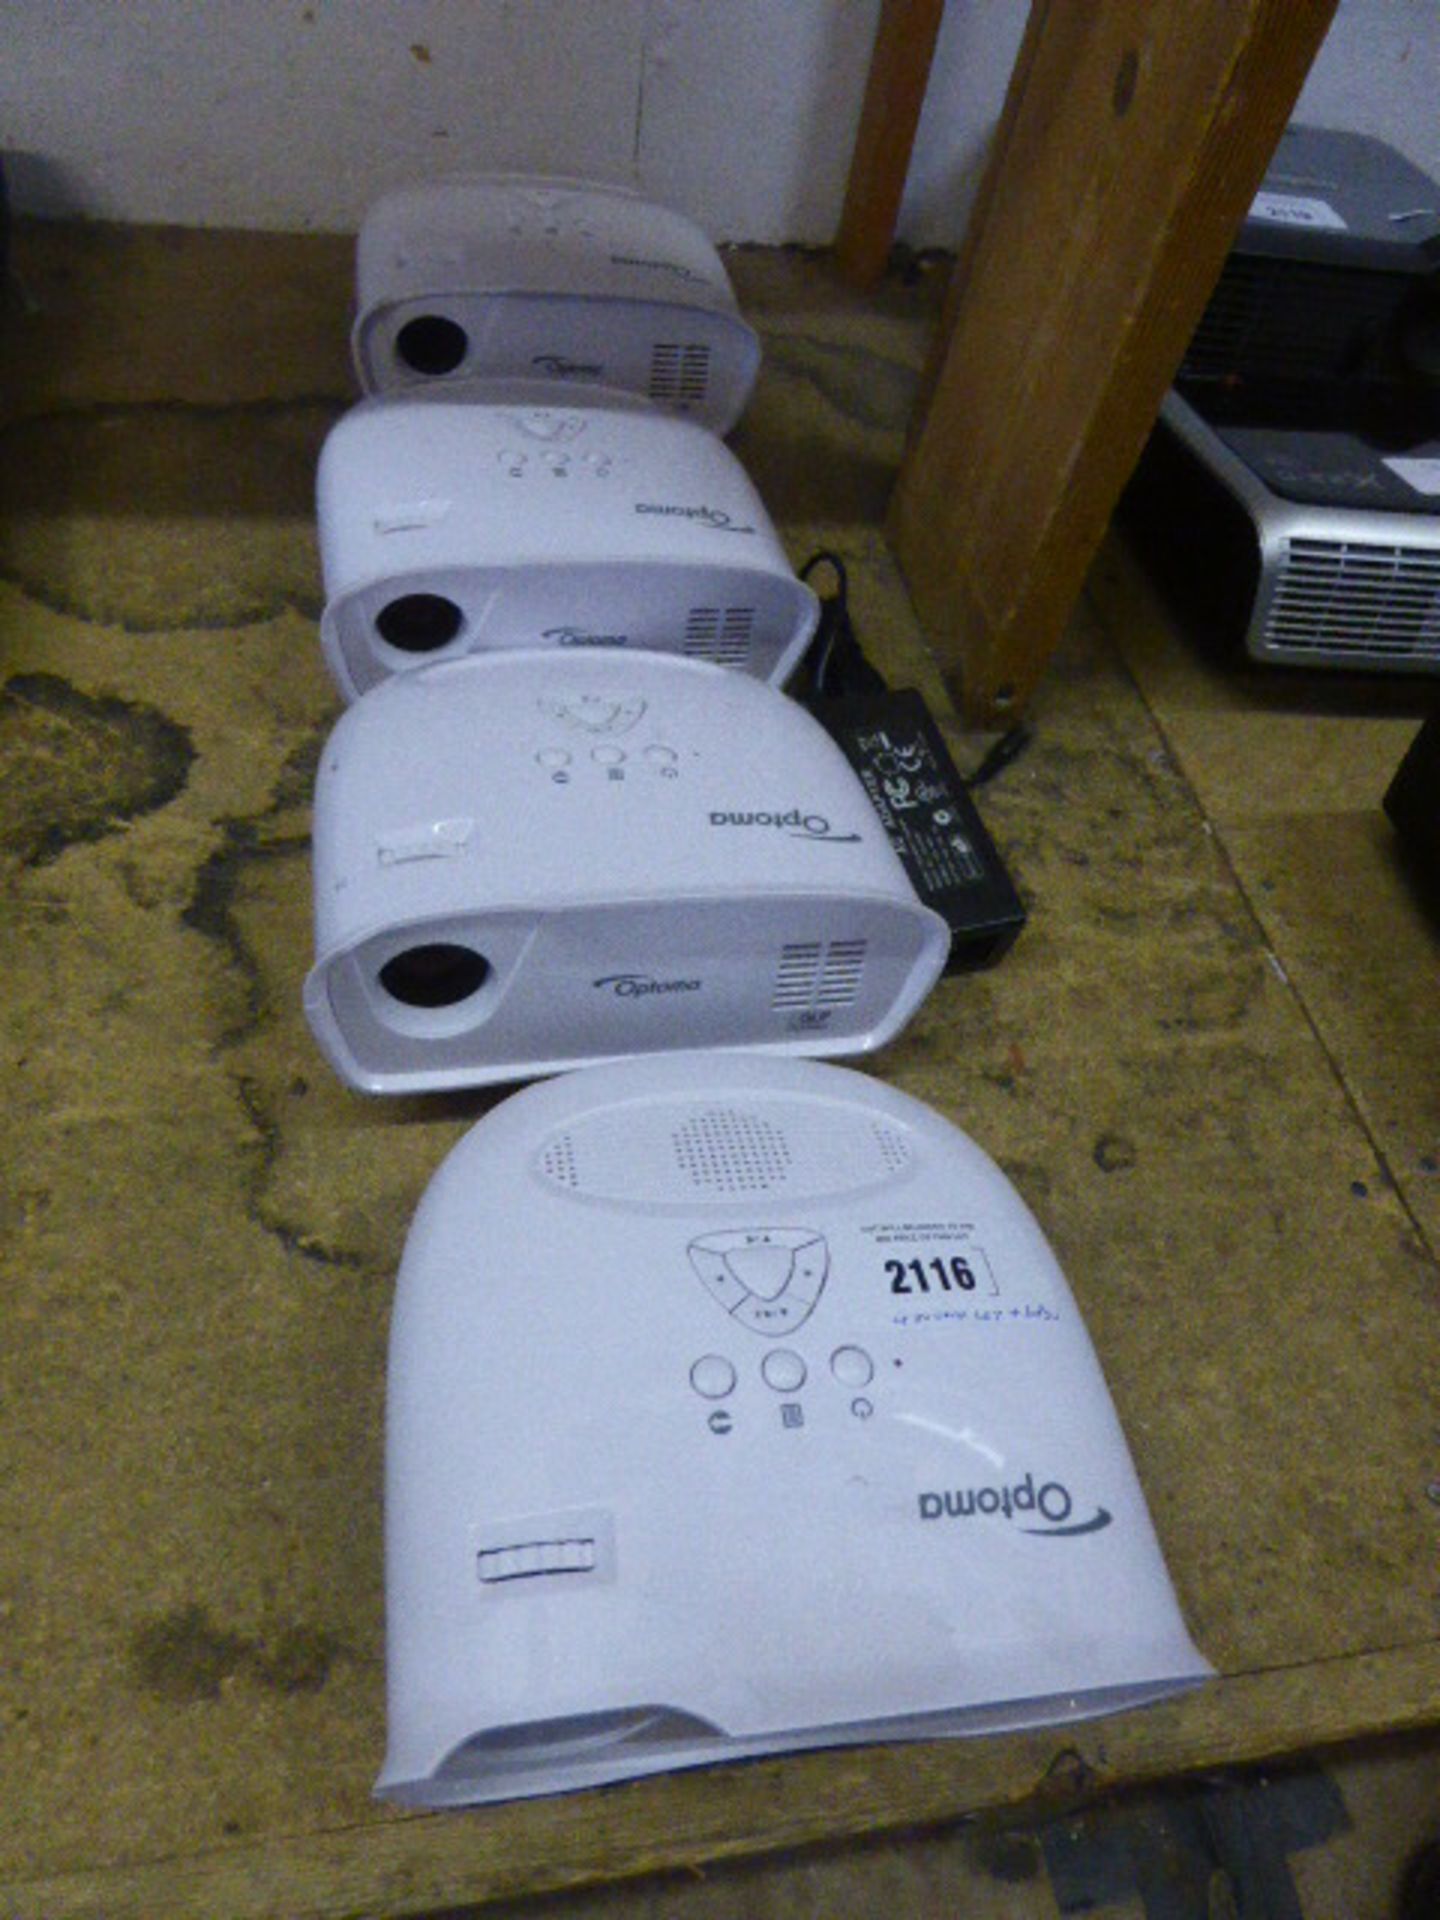 Four Optoma projectors with 1 psu